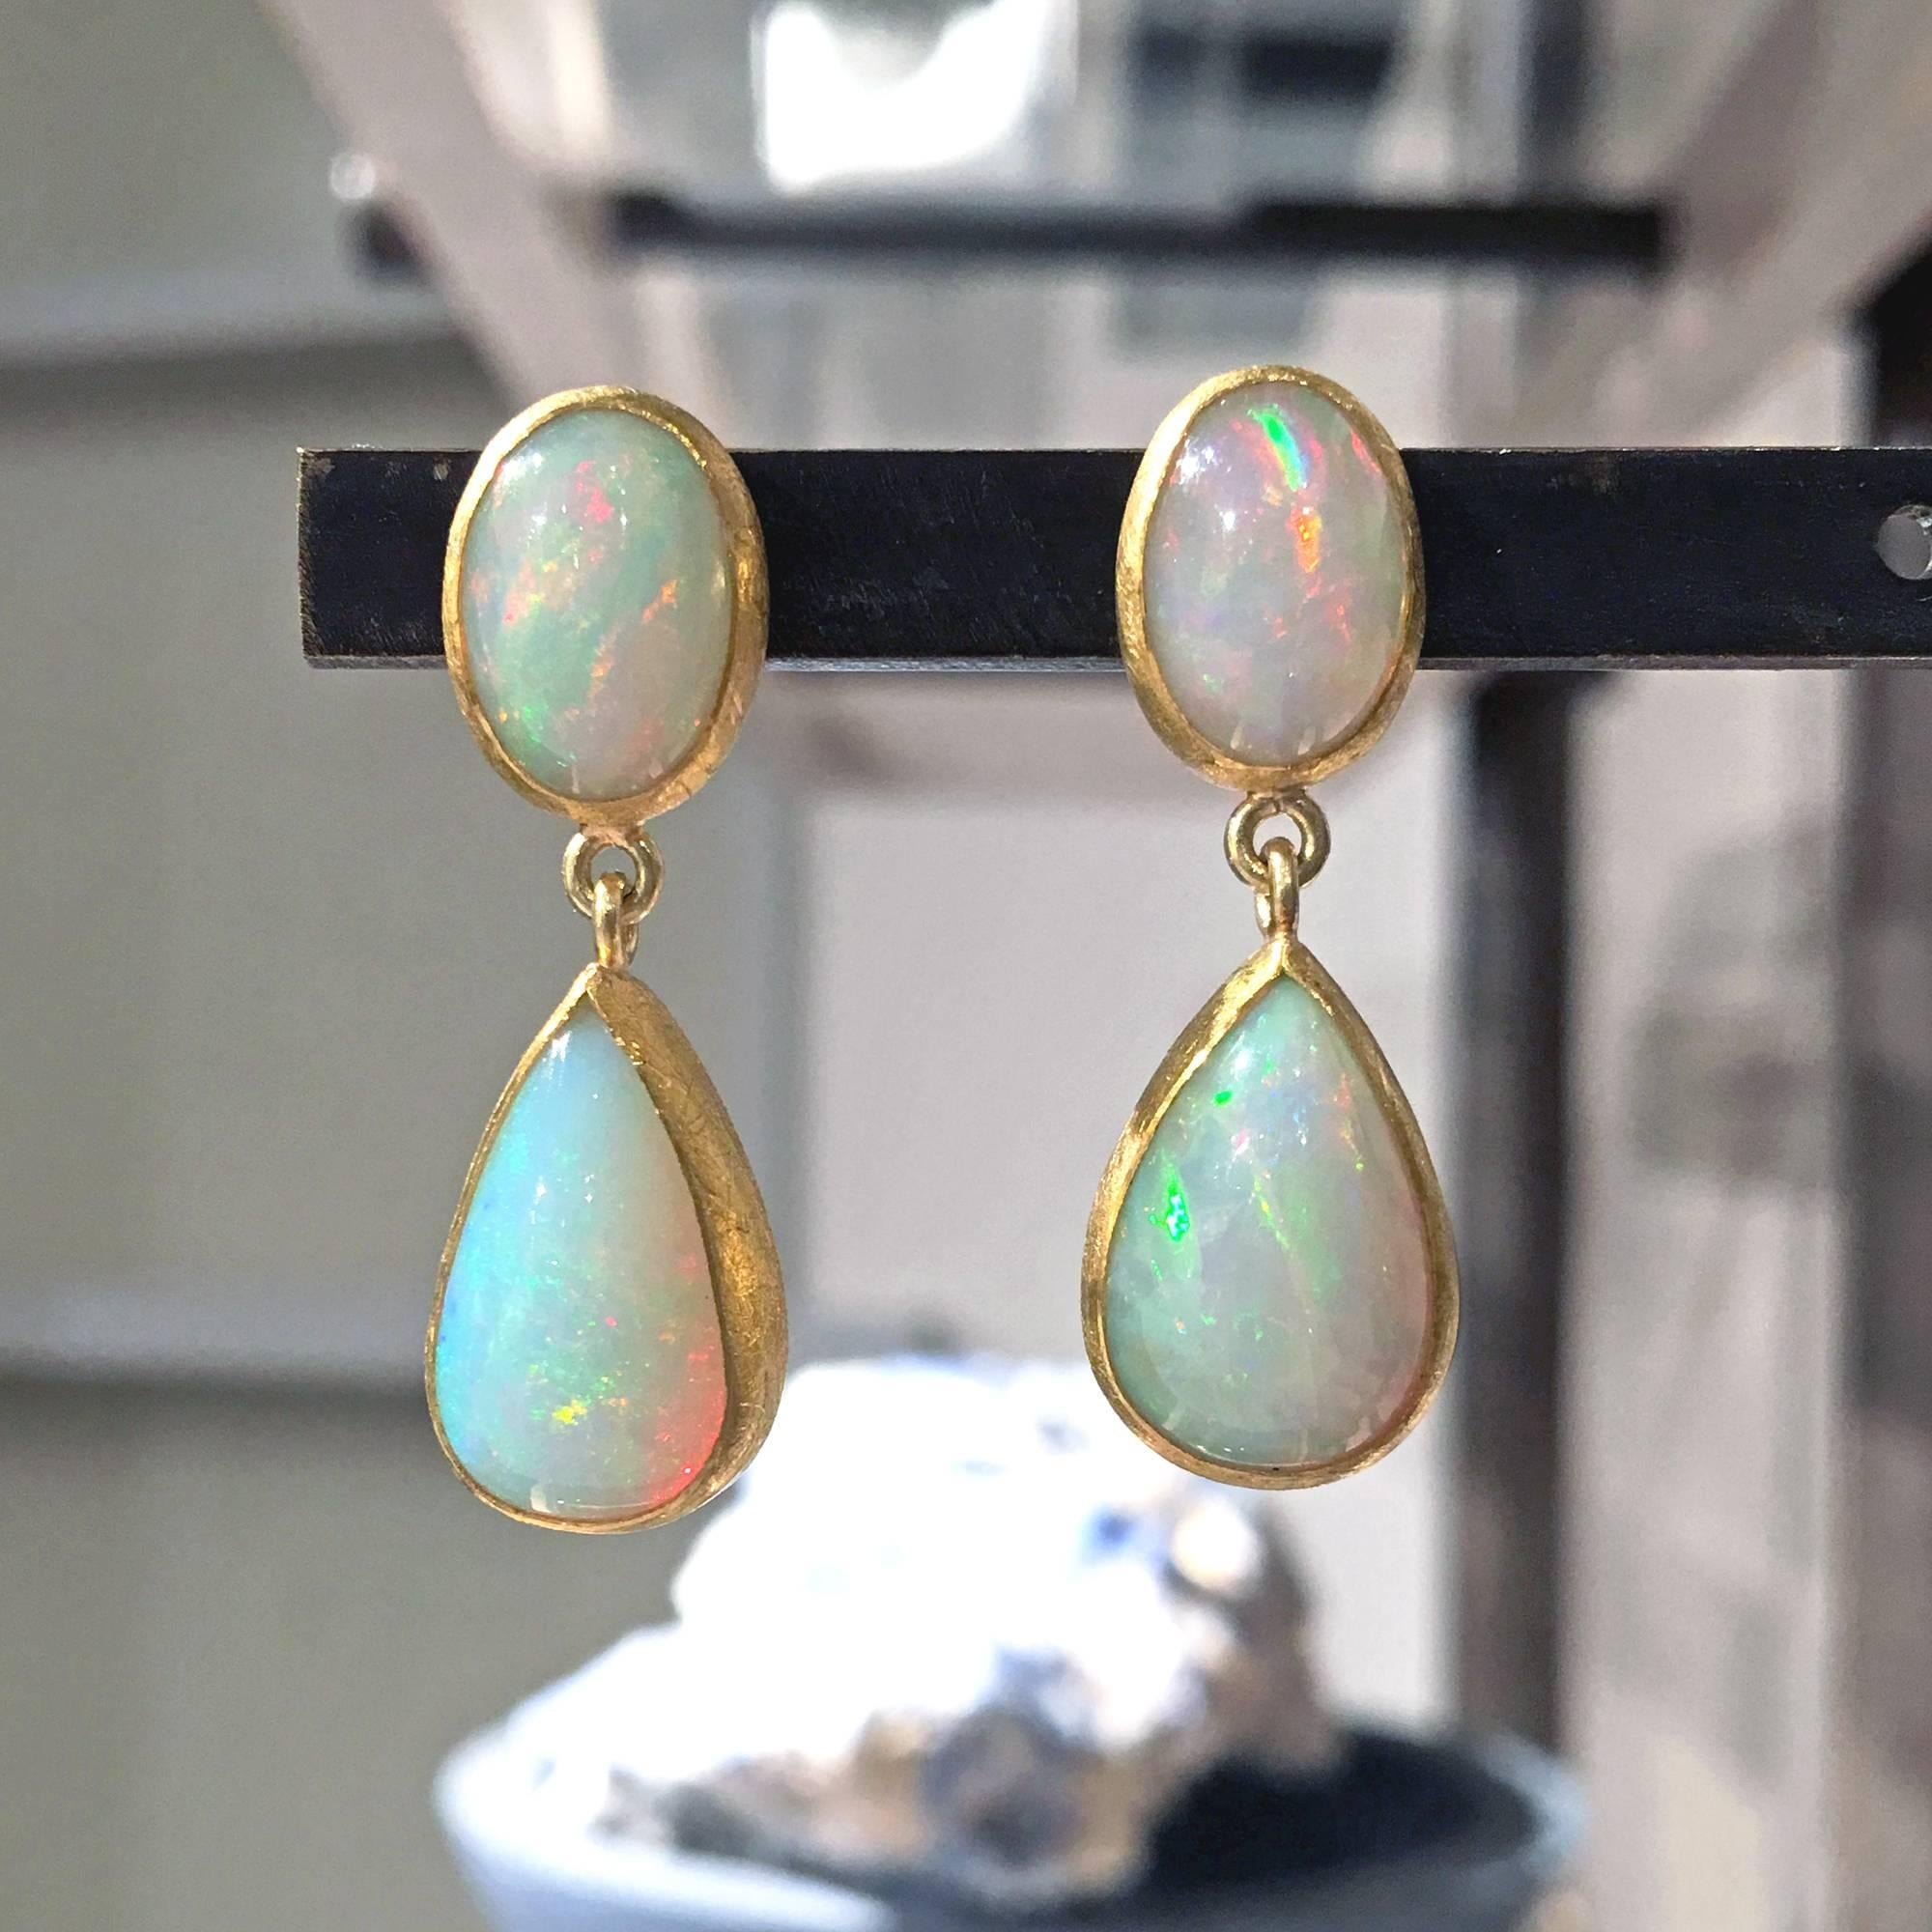 One of a Kind Double Drop Earrings handcrafted in matte-finished 22k yellow gold by Petra Class featuring a 7mm x 11mm cabochon-cut oval Ethiopian opal pair and a matched pair of approximately 9mm x 15mm cabochon-cut pear-shaped Ethiopian opals. All